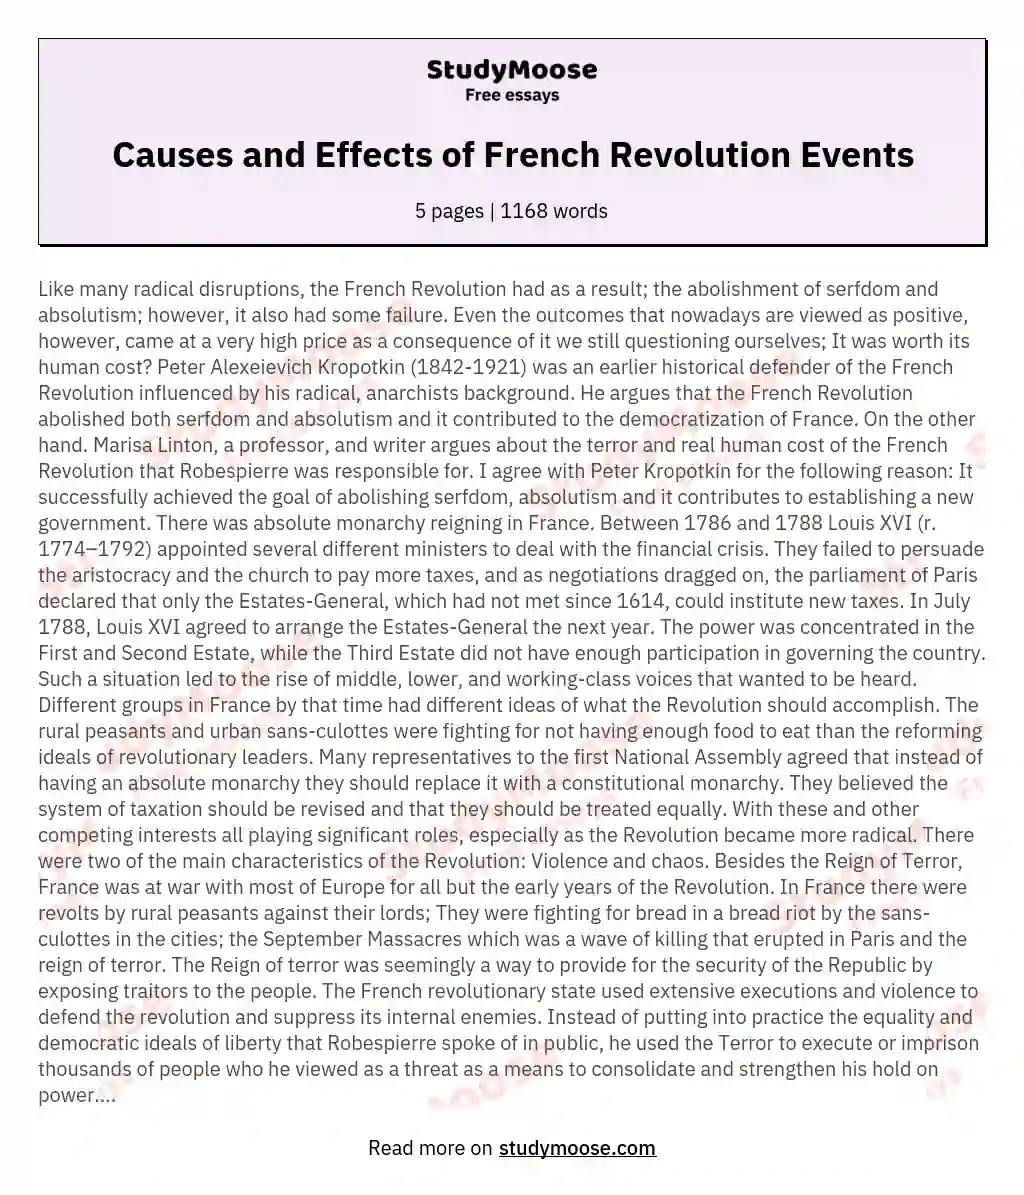 Causes and Effects of French Revolution Events essay